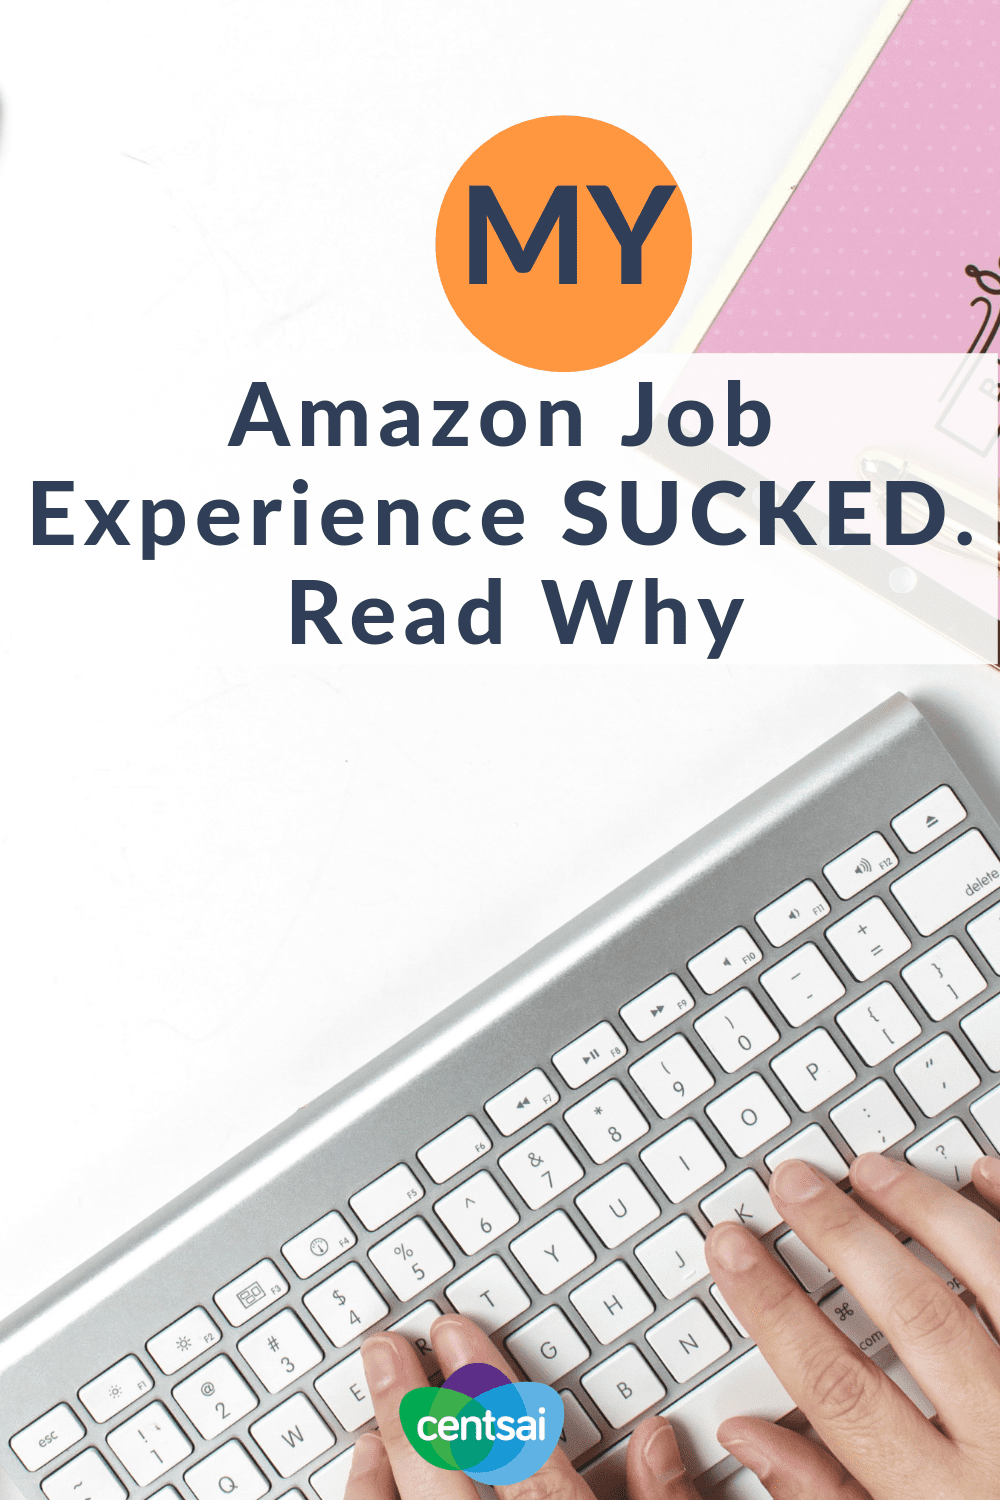 My Amazon Job Experience Sucked. Read Why. Ever wondered how to work from home? Or if it's a good idea? Check out what I learned from my experience with Amazon work-from-home jobs. #Amazon #Amazonjob #sidehustle #career